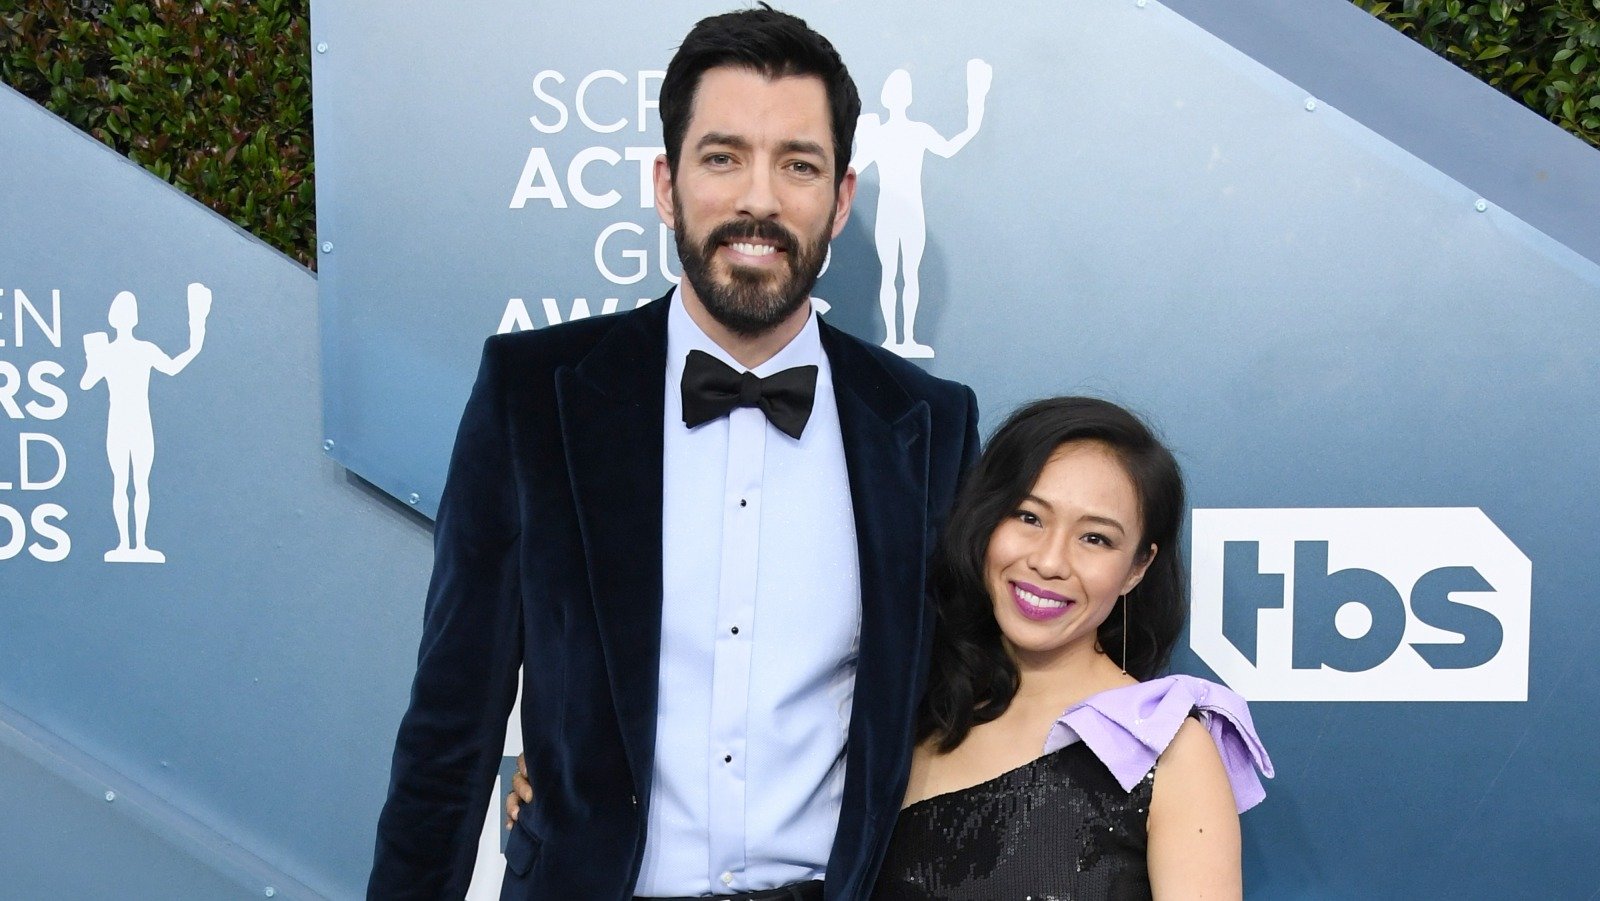 How Drew Scott Impressed Linda Phan On Their First Date - The List